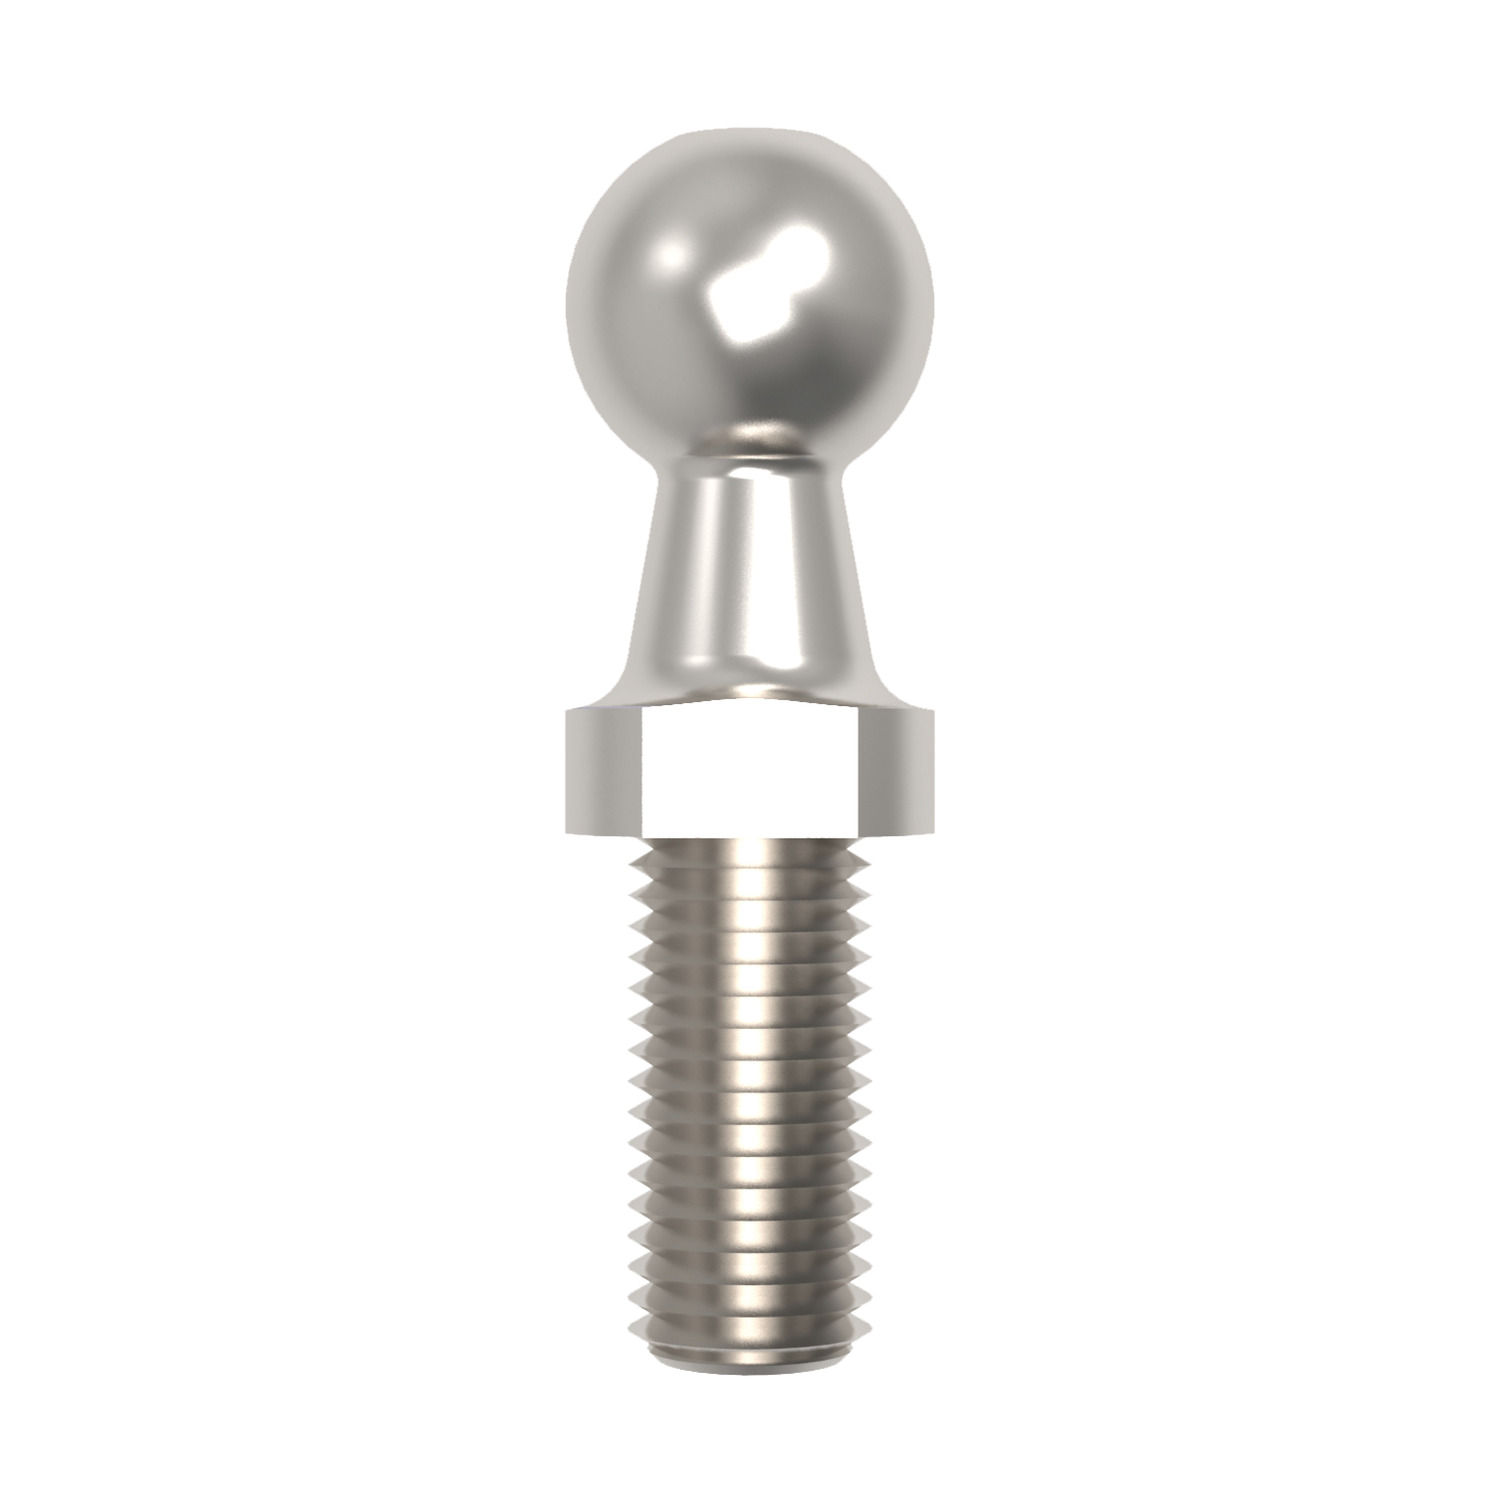 R3528 - Stainless Threaded Ball Studs